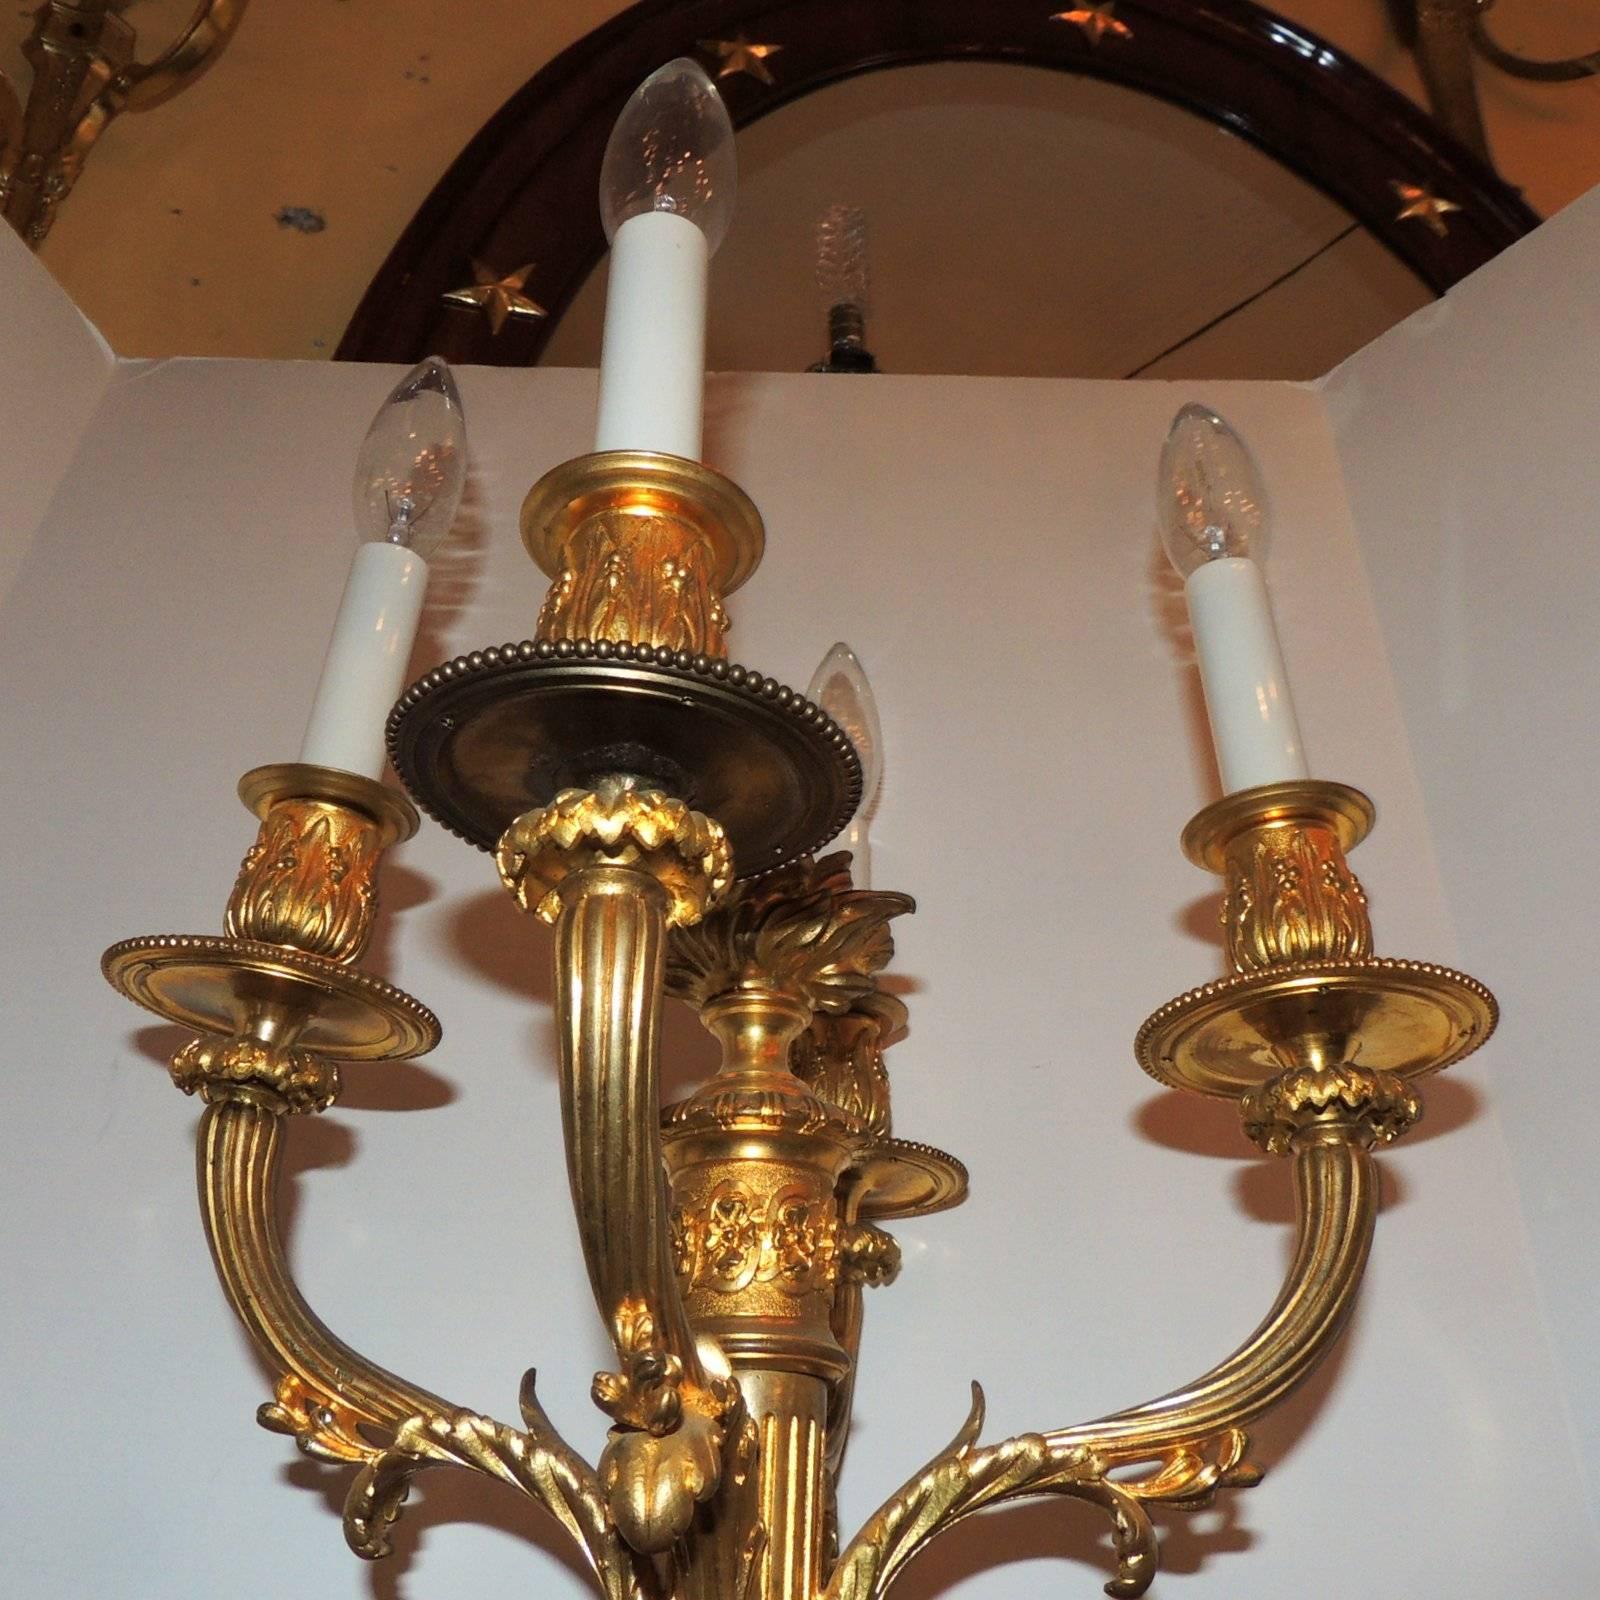 Wonderful Pair French Neoclassical Dore Bronze Regency Four-Arm Candelabra Lamps For Sale 3